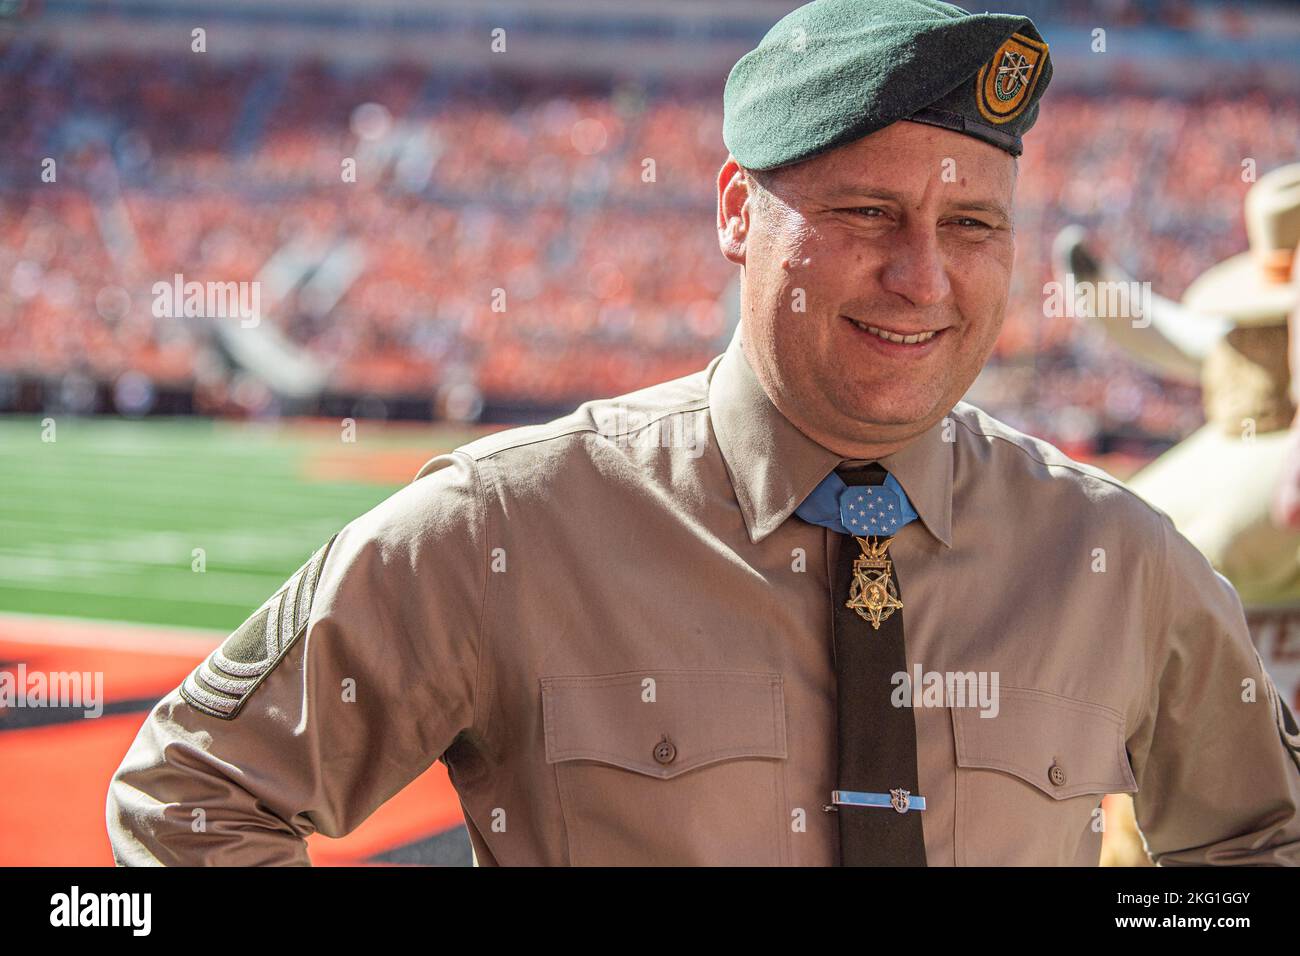 Master Sgt. Earl Plumlee, a Medal of Honor recipient, takes part in pre-game activities at the Oklahoma State University homecoming football game in Stillwater, Oklahoma, Oct. 22, 2022. Plumlee, a native Oklahoman, toured his home state Oct. 18-22. During his visit, Plumlee attended the Oklahoma State University homecoming football game and was honored as the Orange Power VIP of the game. (Oklahoma National Guard photo by Sgt. Anthony Jones) Stock Photo